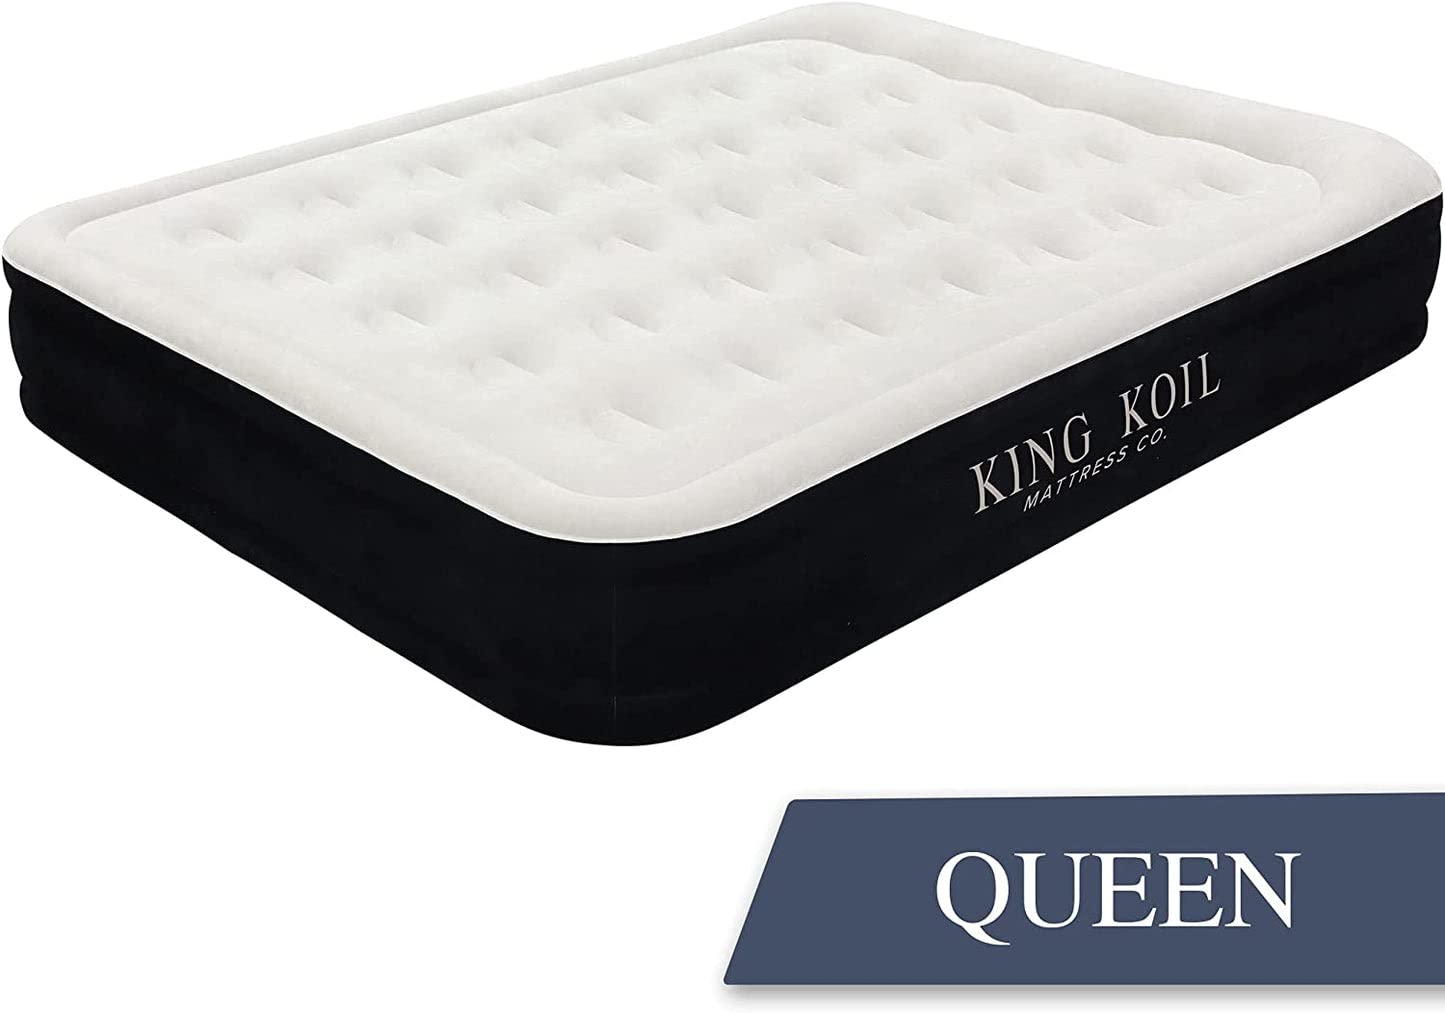 King Koil Luxury Queen Air Mattress with Built-in High Speed Pump, Blow Up Bed Top and Side Flocking, Puncture Resistant, Double High Inflatable Airbed for Camping, Home, Travel